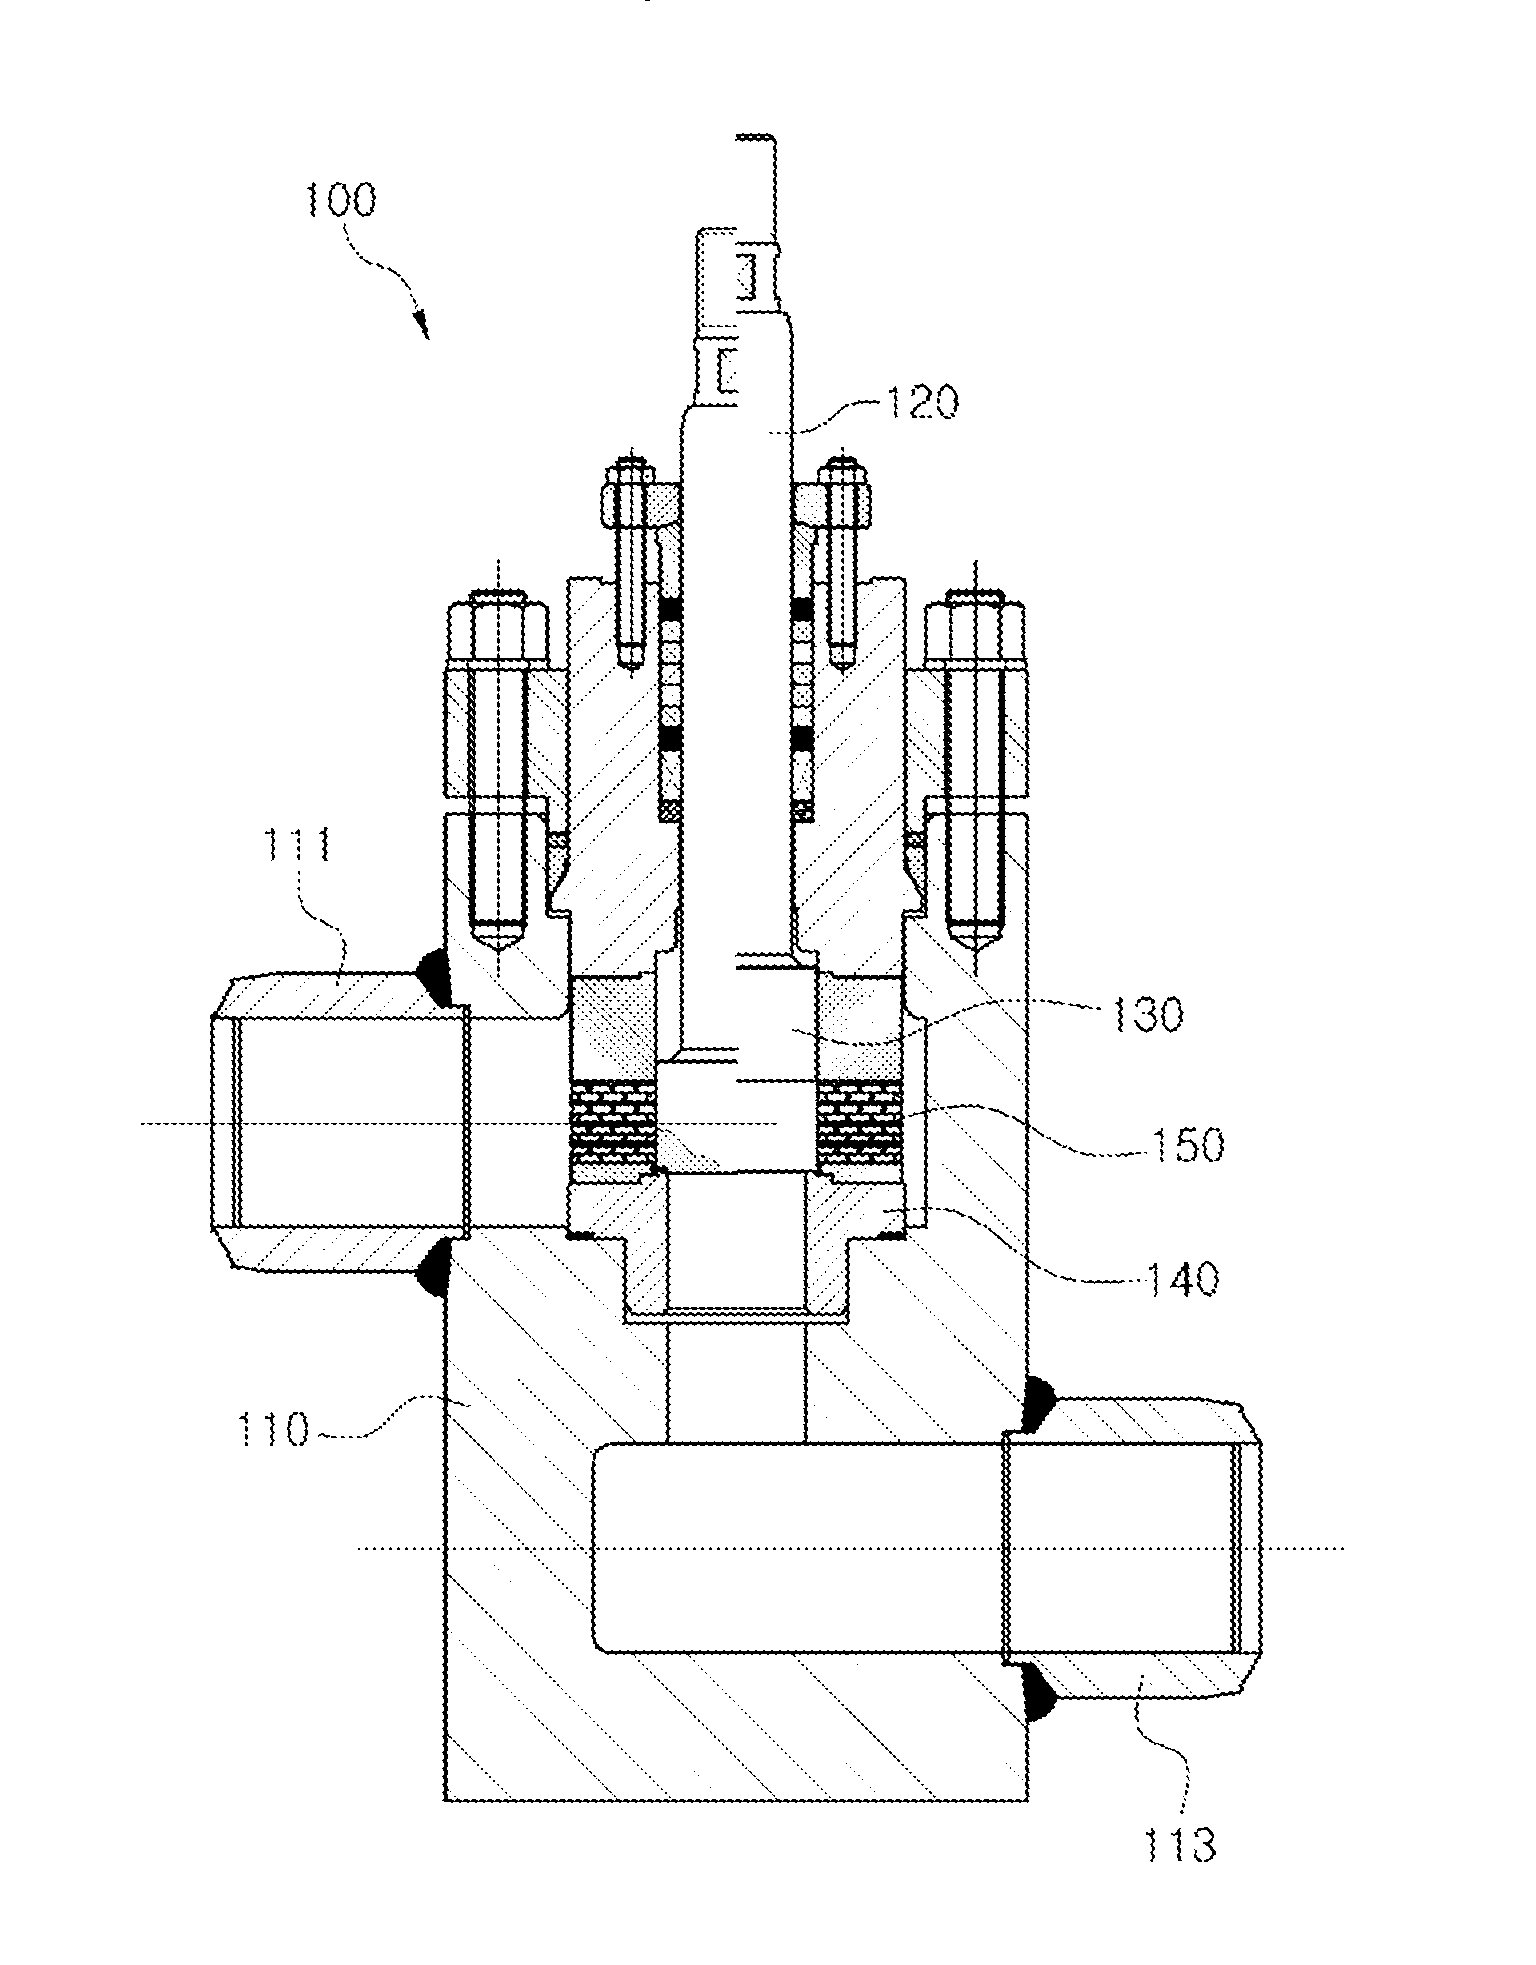 Device for reducing pressure and velocity of flowing fluid